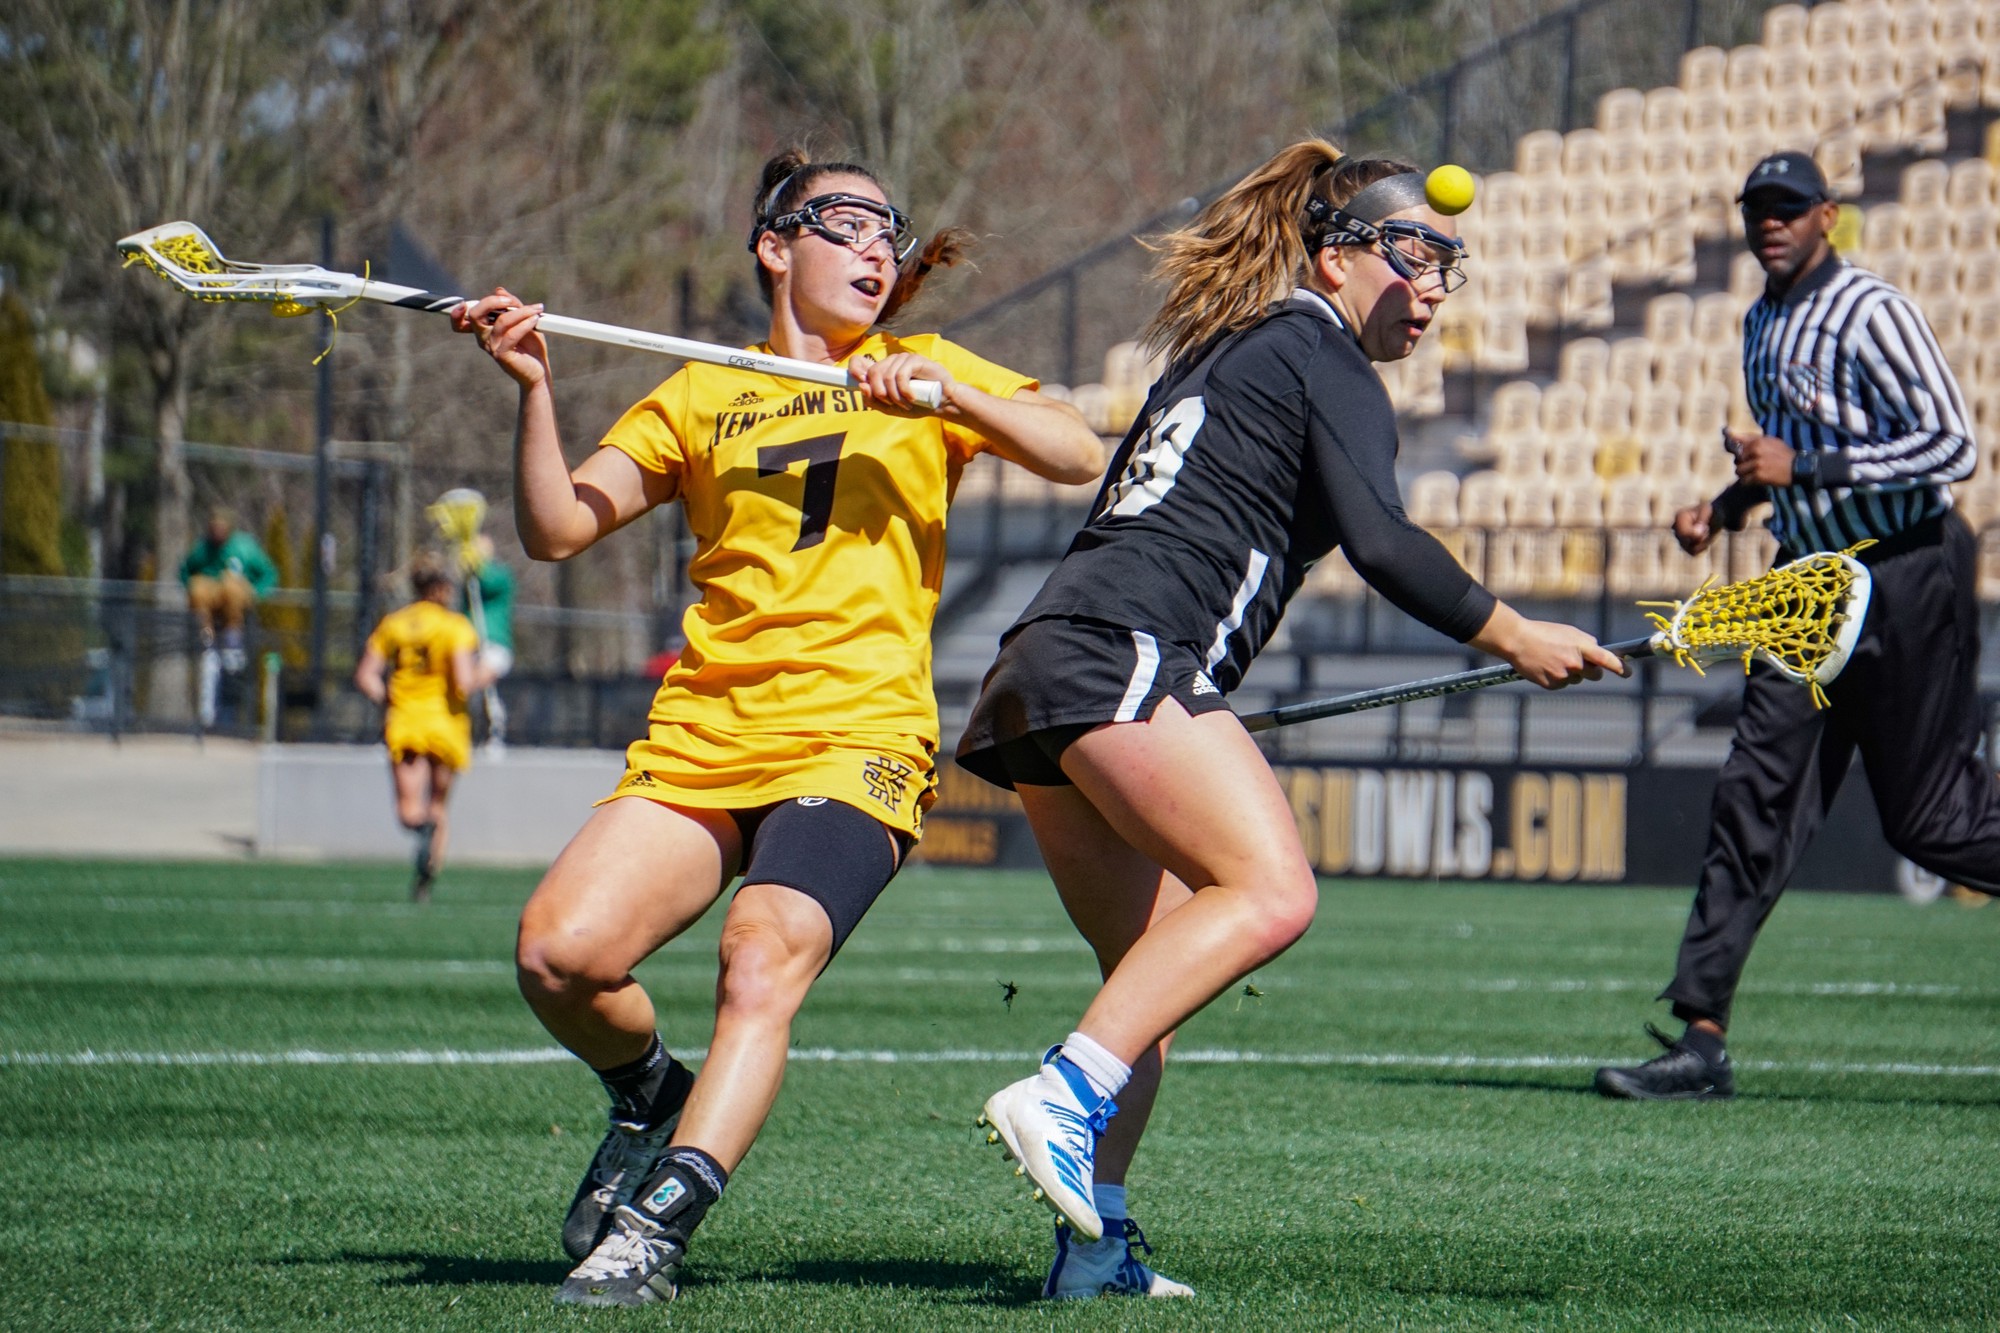 Women’s lacrosse loses to Florida, defeats Presbyterian in home matchups